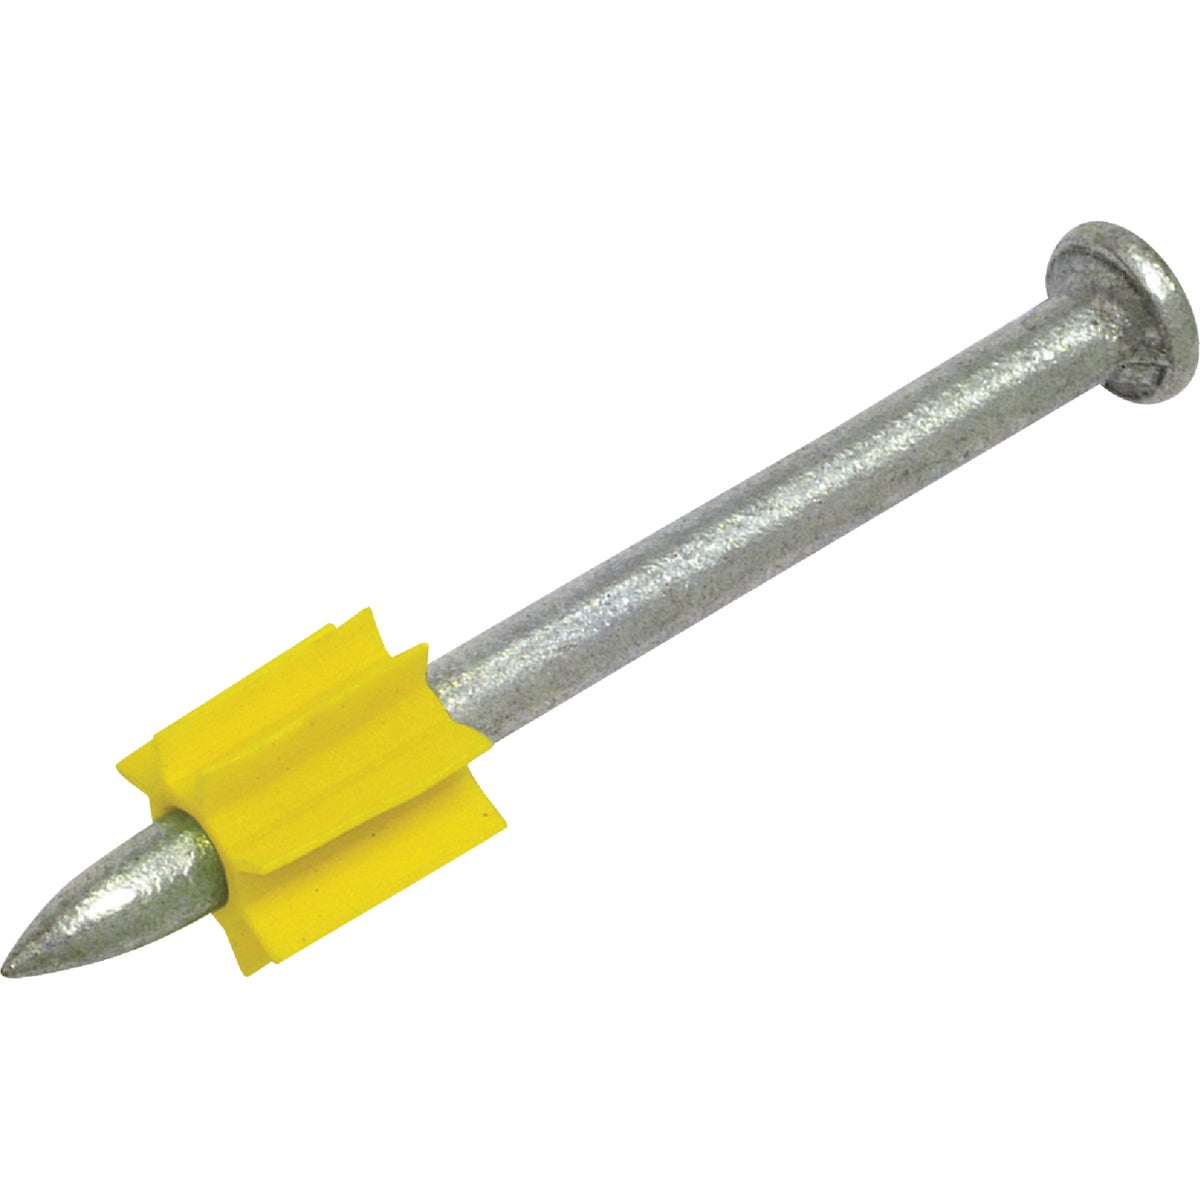 Simpson Strong-Tie PDPA-125 Simpson Strong-Tie 1-1/4 In. Structural Steel Fastening Pin (100-Pack) PDPA-125